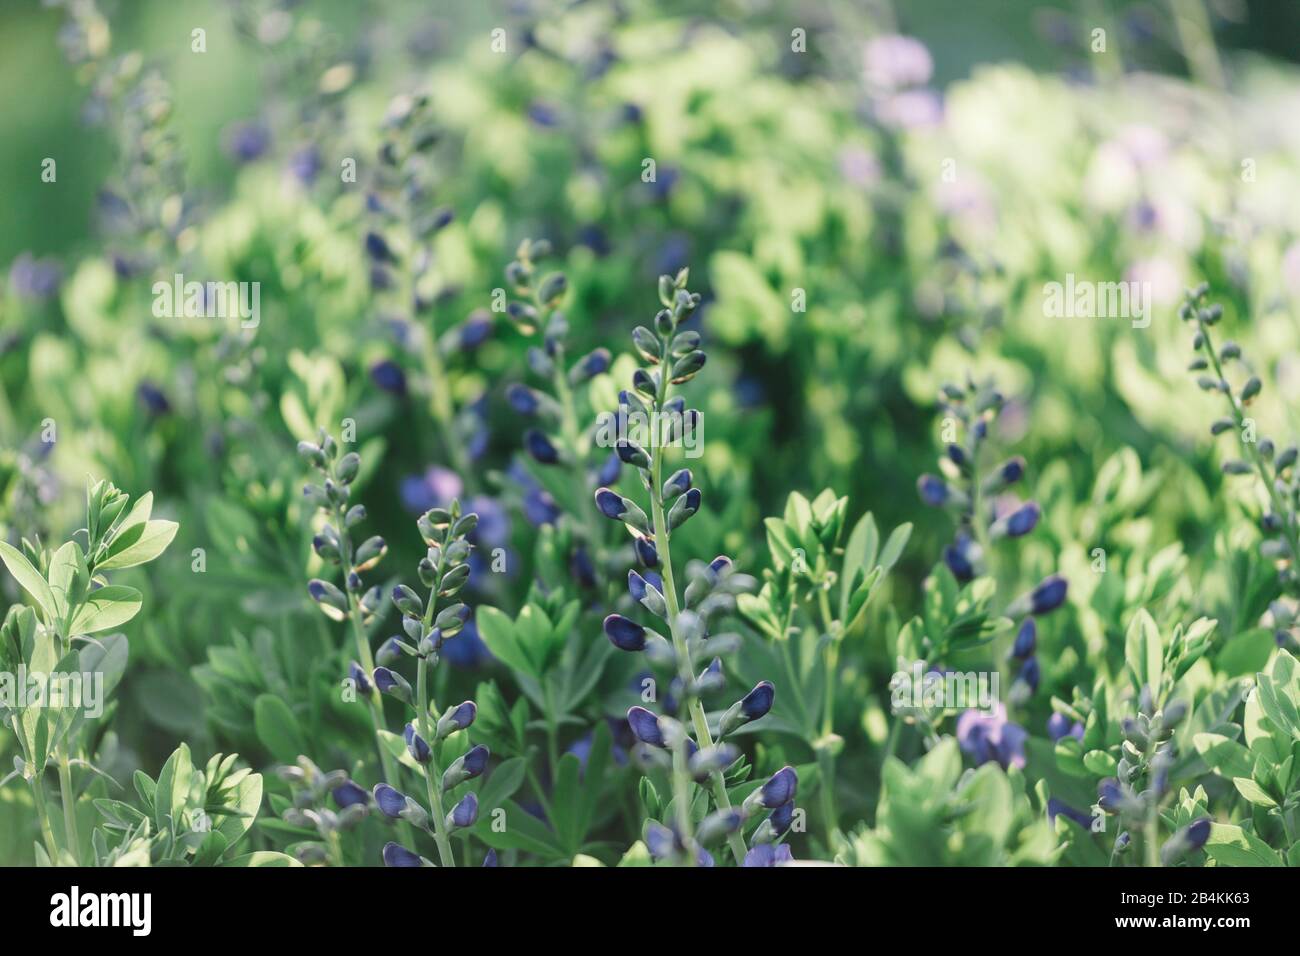 Plant details, purple blooming garden flowers, close-up Stock Photo